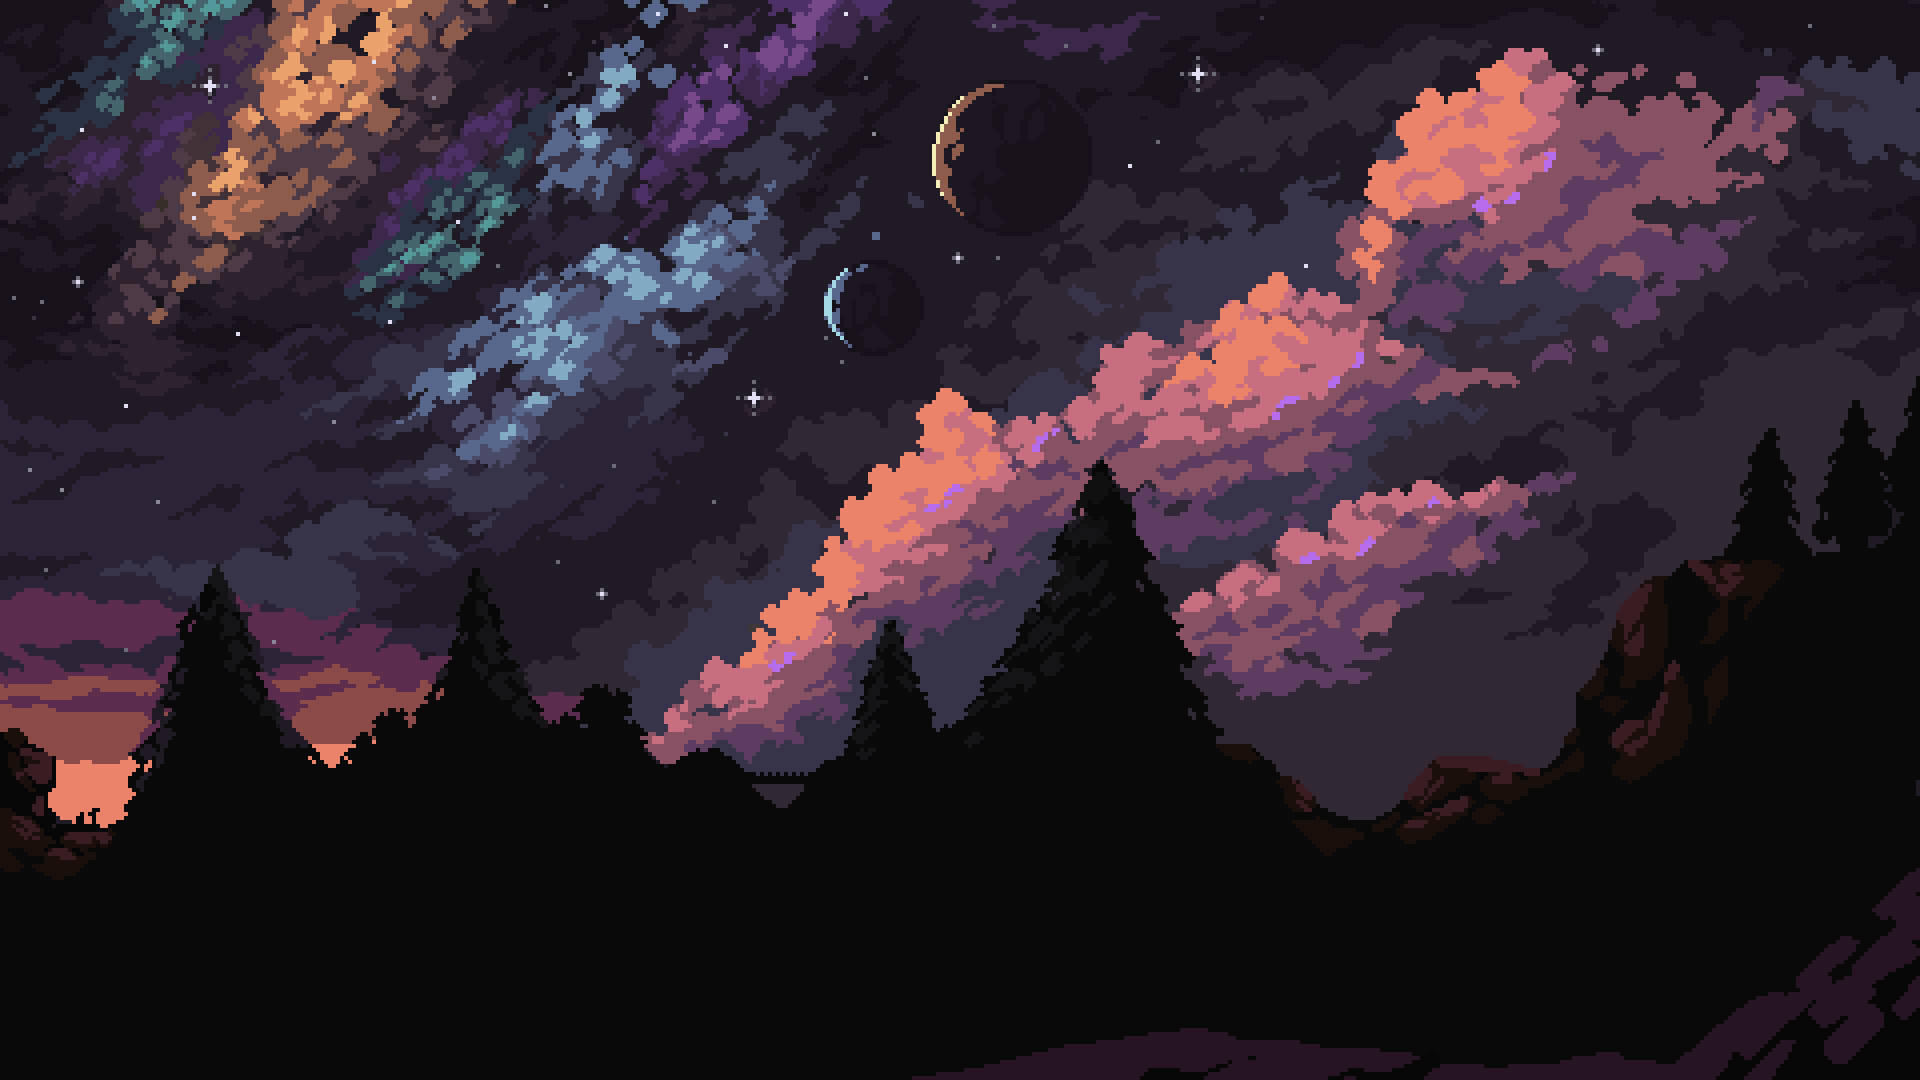 Aesthetic Pixel Art Of Planets At Night Wallpaper